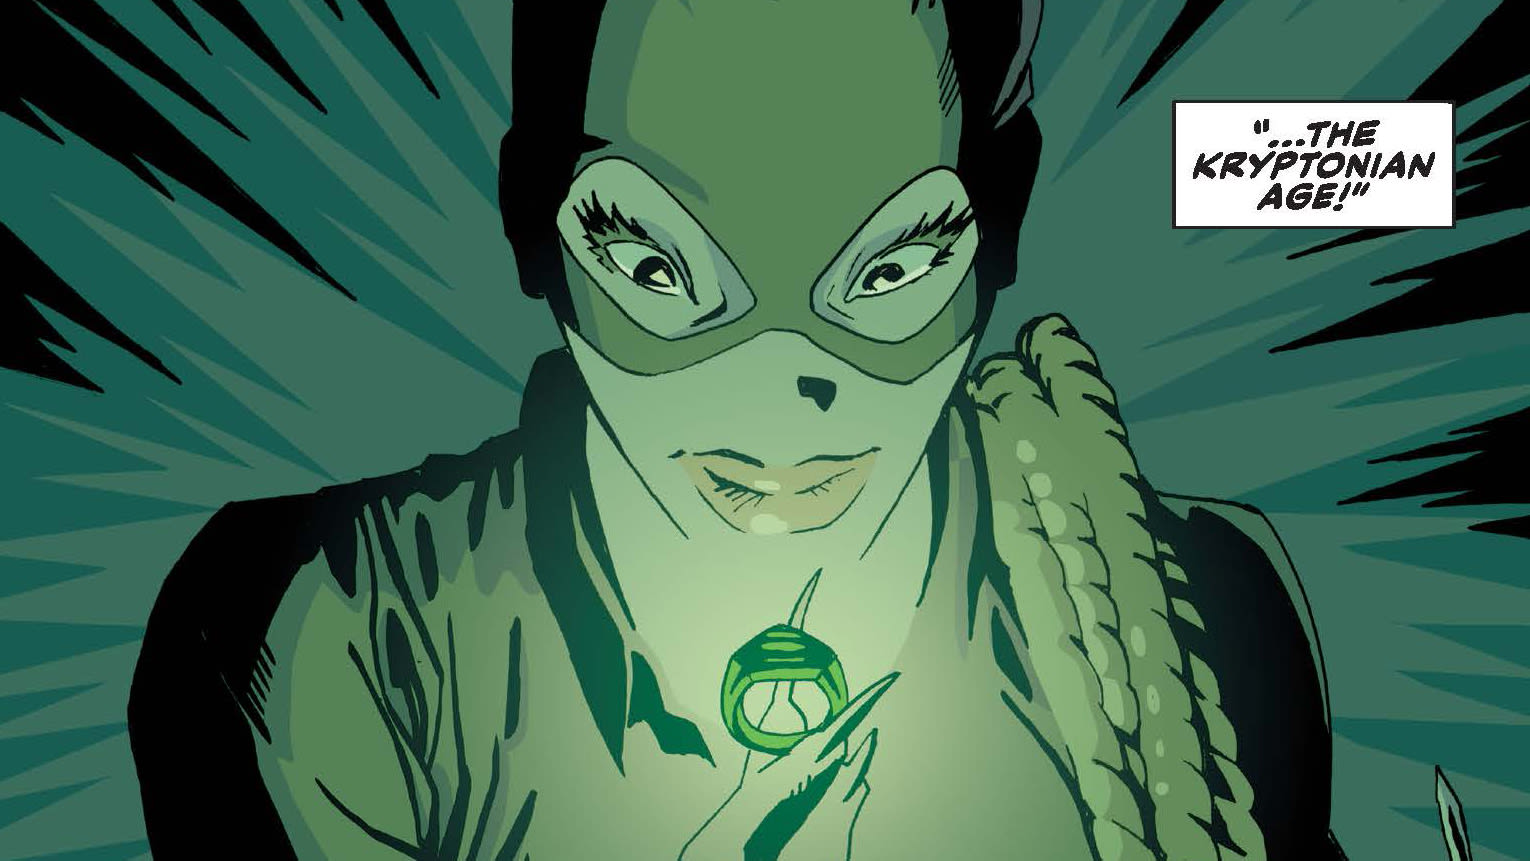 Catwoman gets her claws on a Green Lantern Power Ring in the upcoming sequel to one of Batman's best ever stories